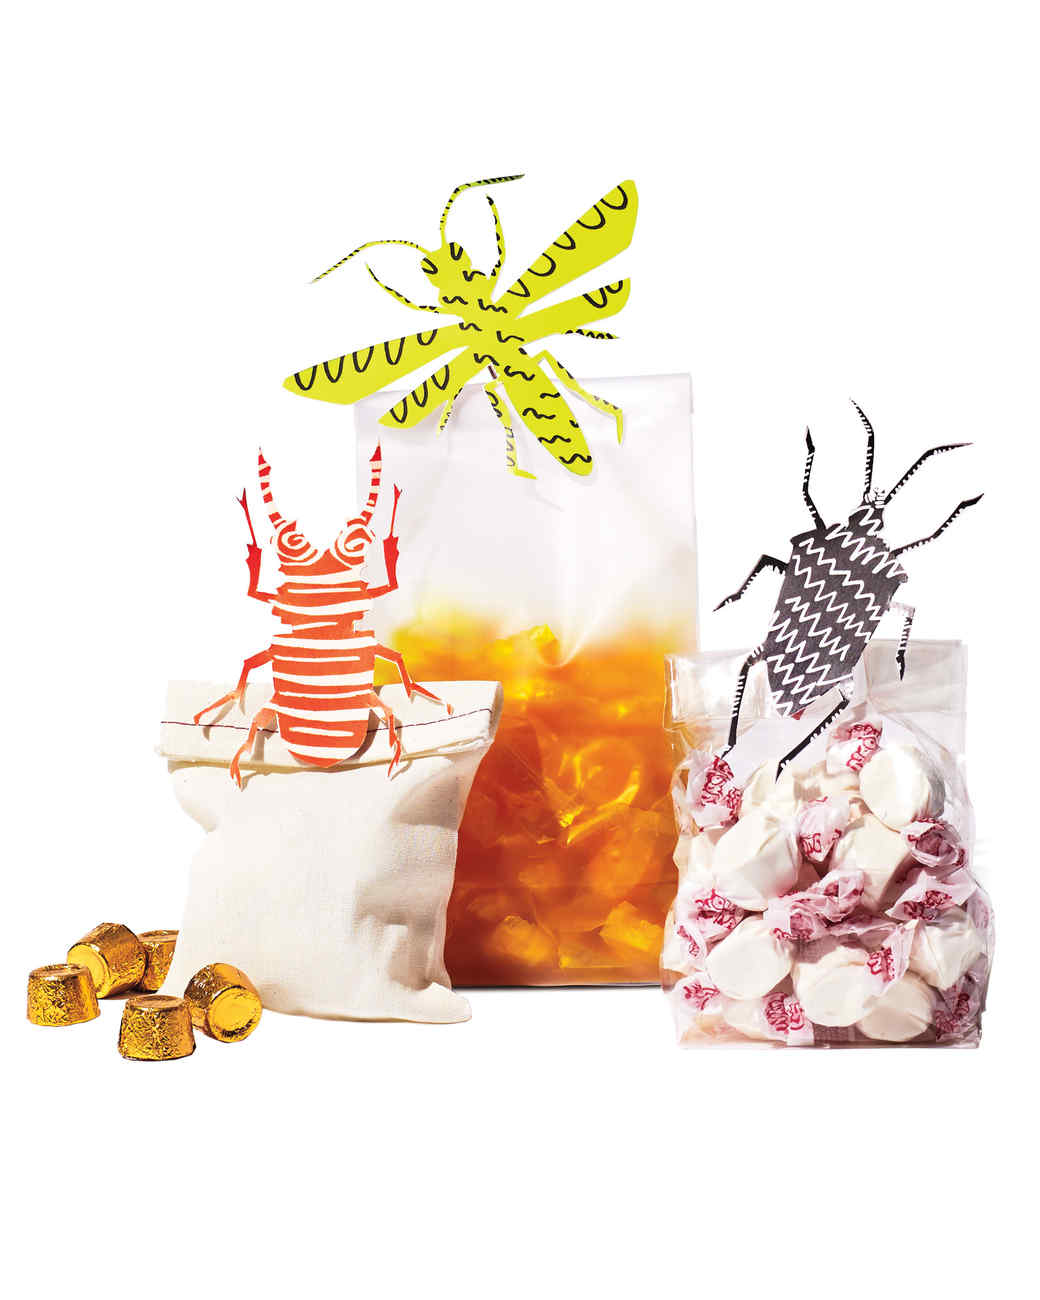 clothespin crafts treat bags bugs